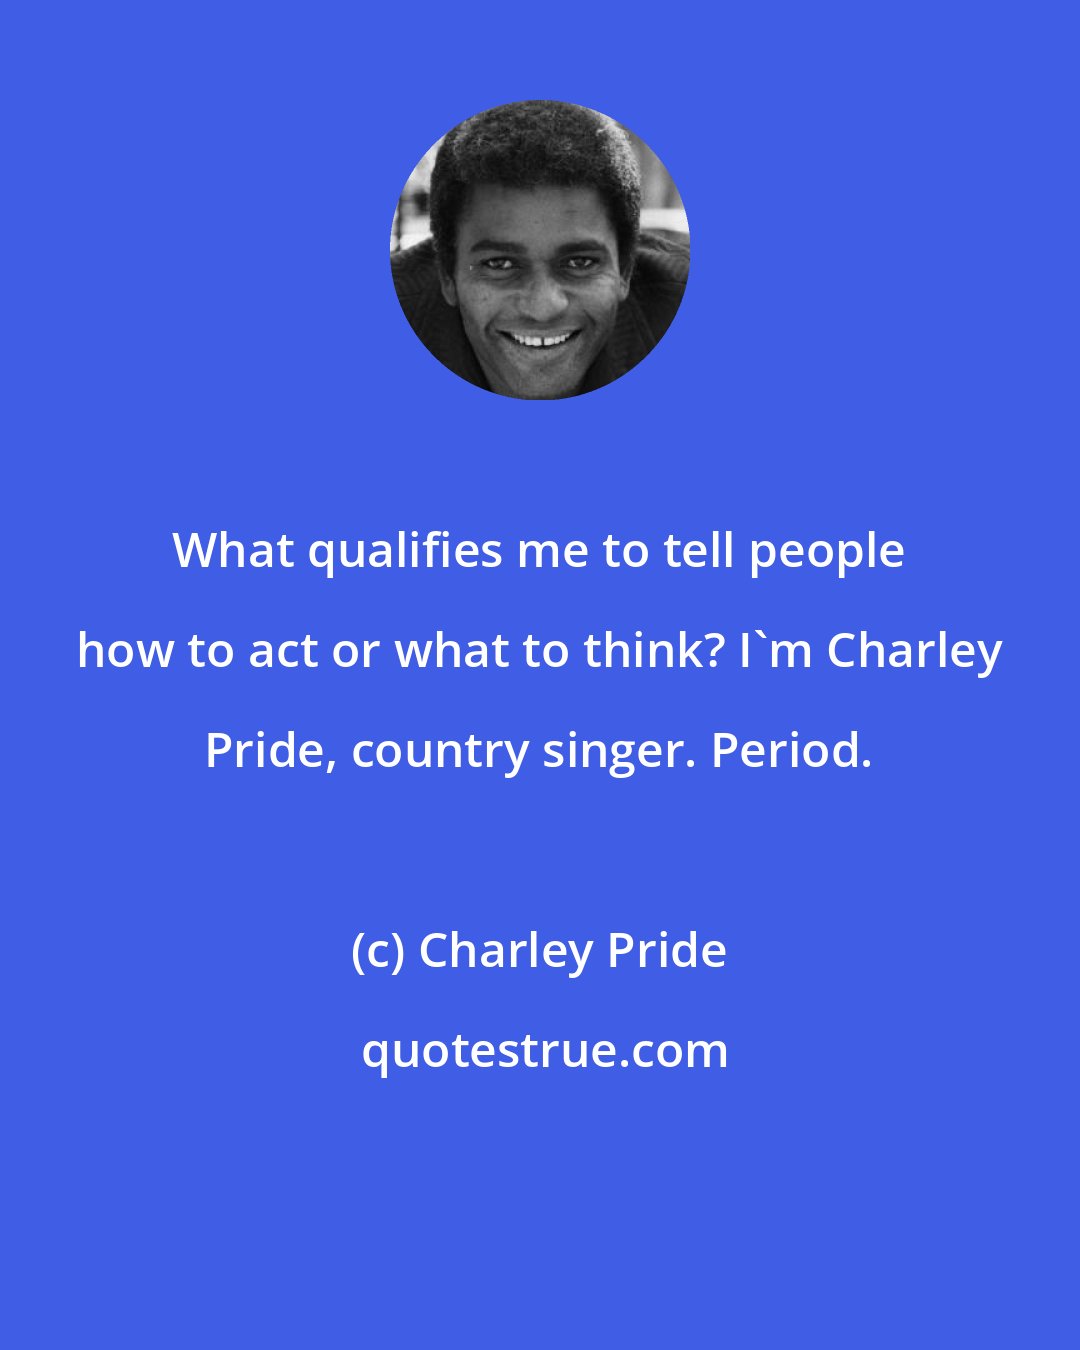 Charley Pride: What qualifies me to tell people how to act or what to think? I'm Charley Pride, country singer. Period.